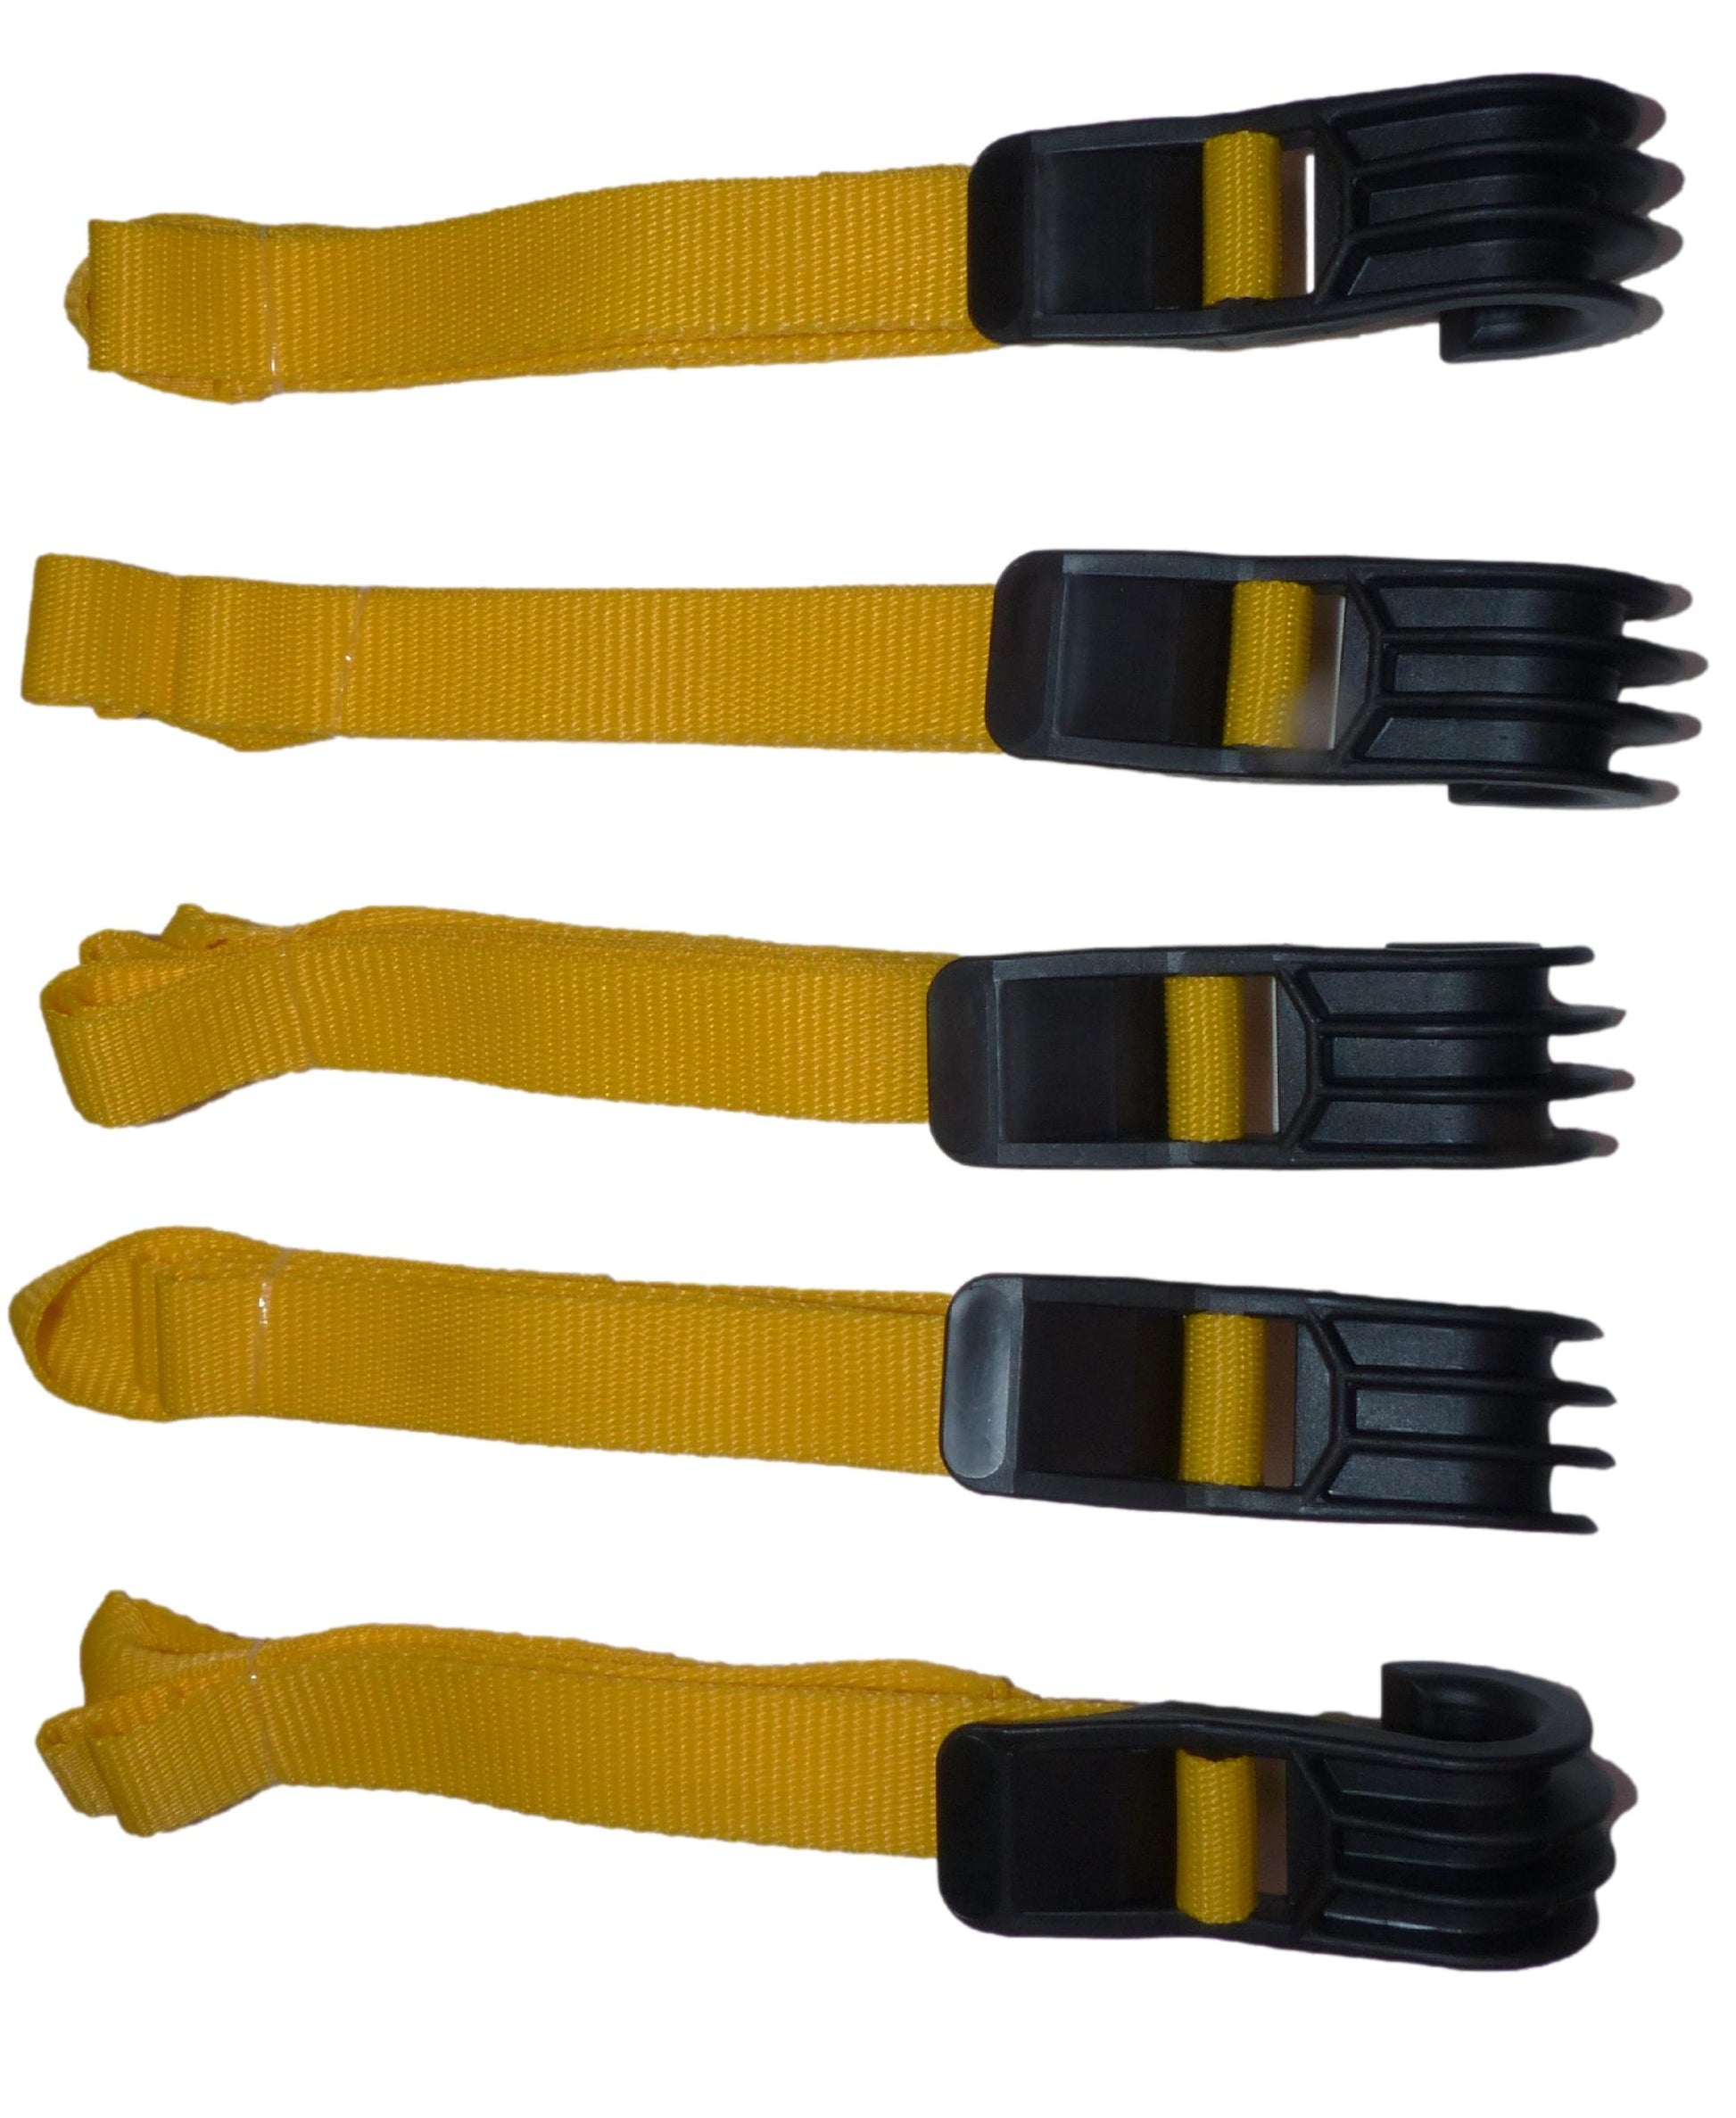 Benristraps Roll Cage, Trolley, Pallet Straps (Pack of 5) in yellow